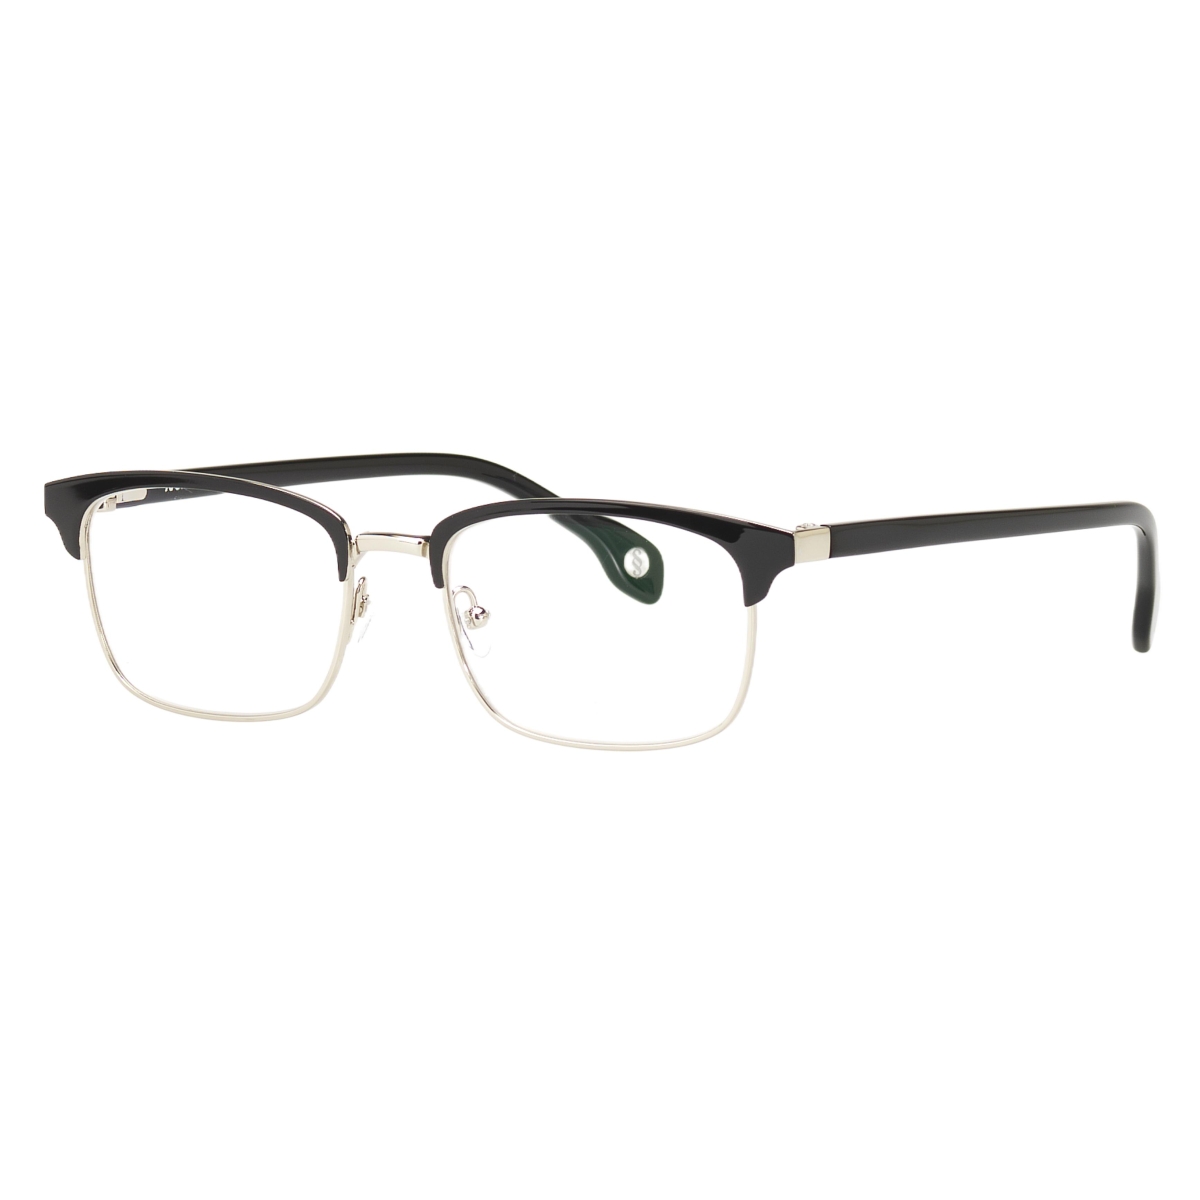 Sugar Specs - The Diplomat 01 Black and Silver